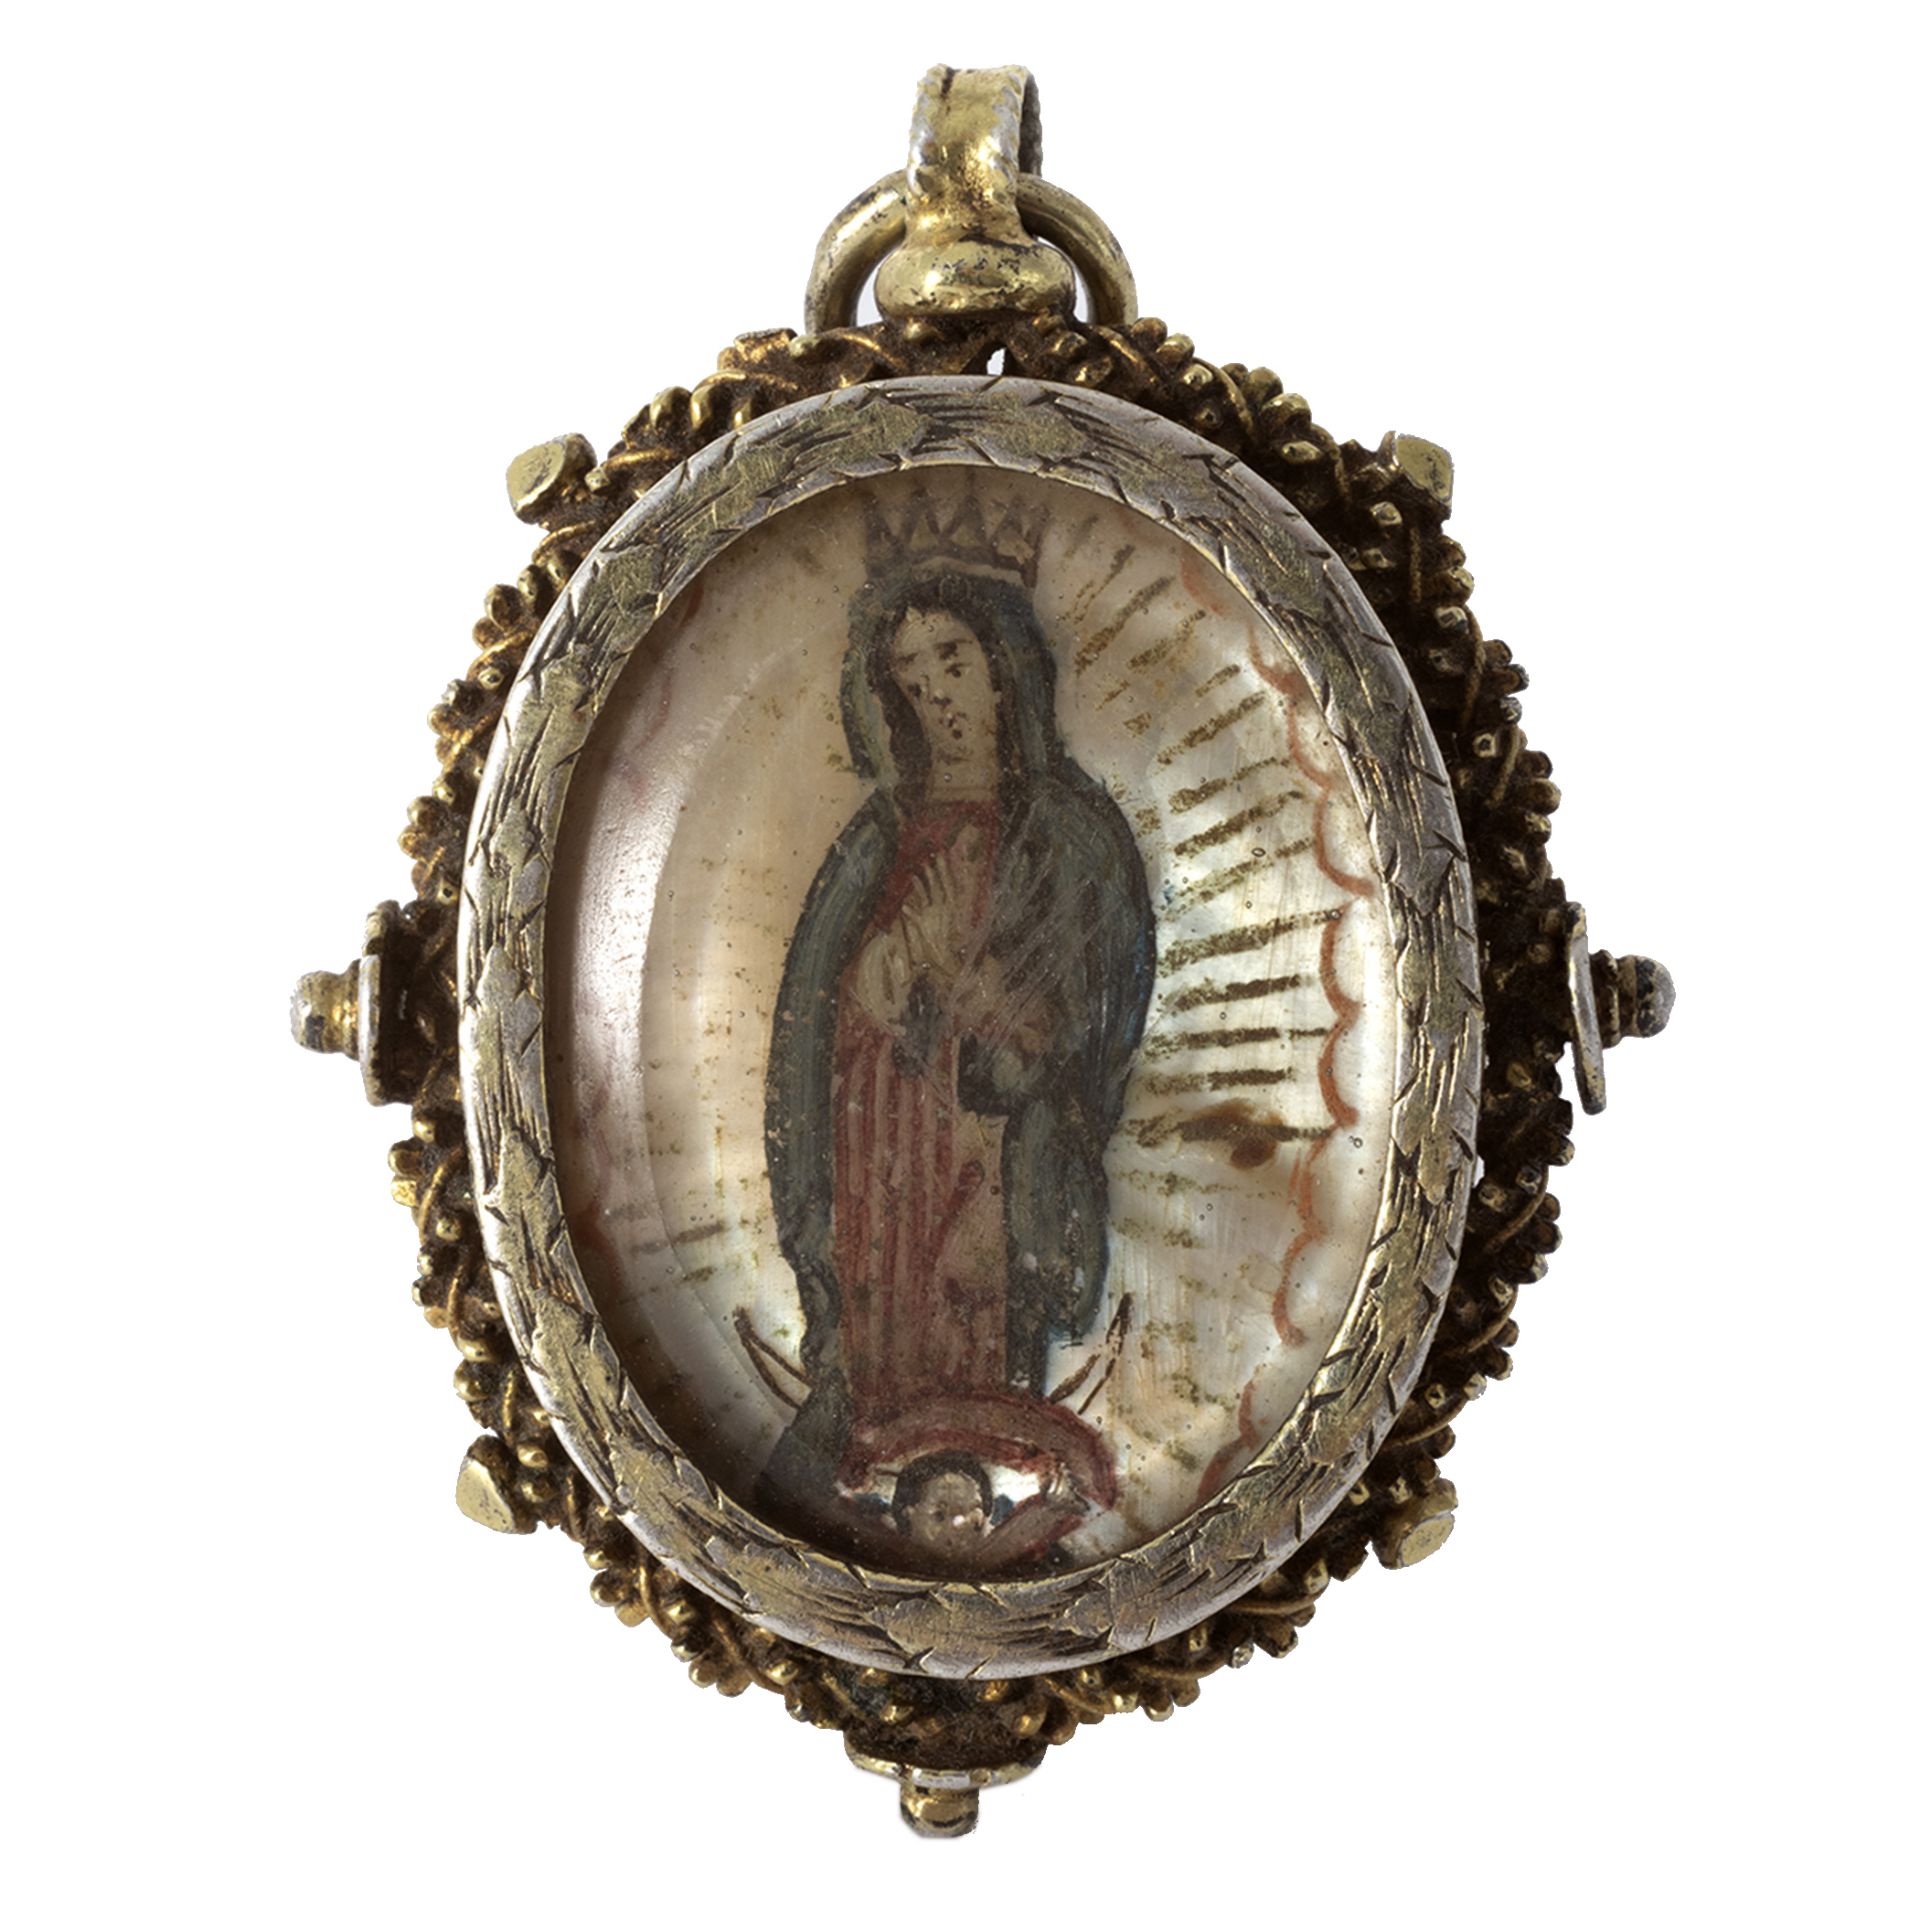 Spanish colonial silver reliquary pendant.